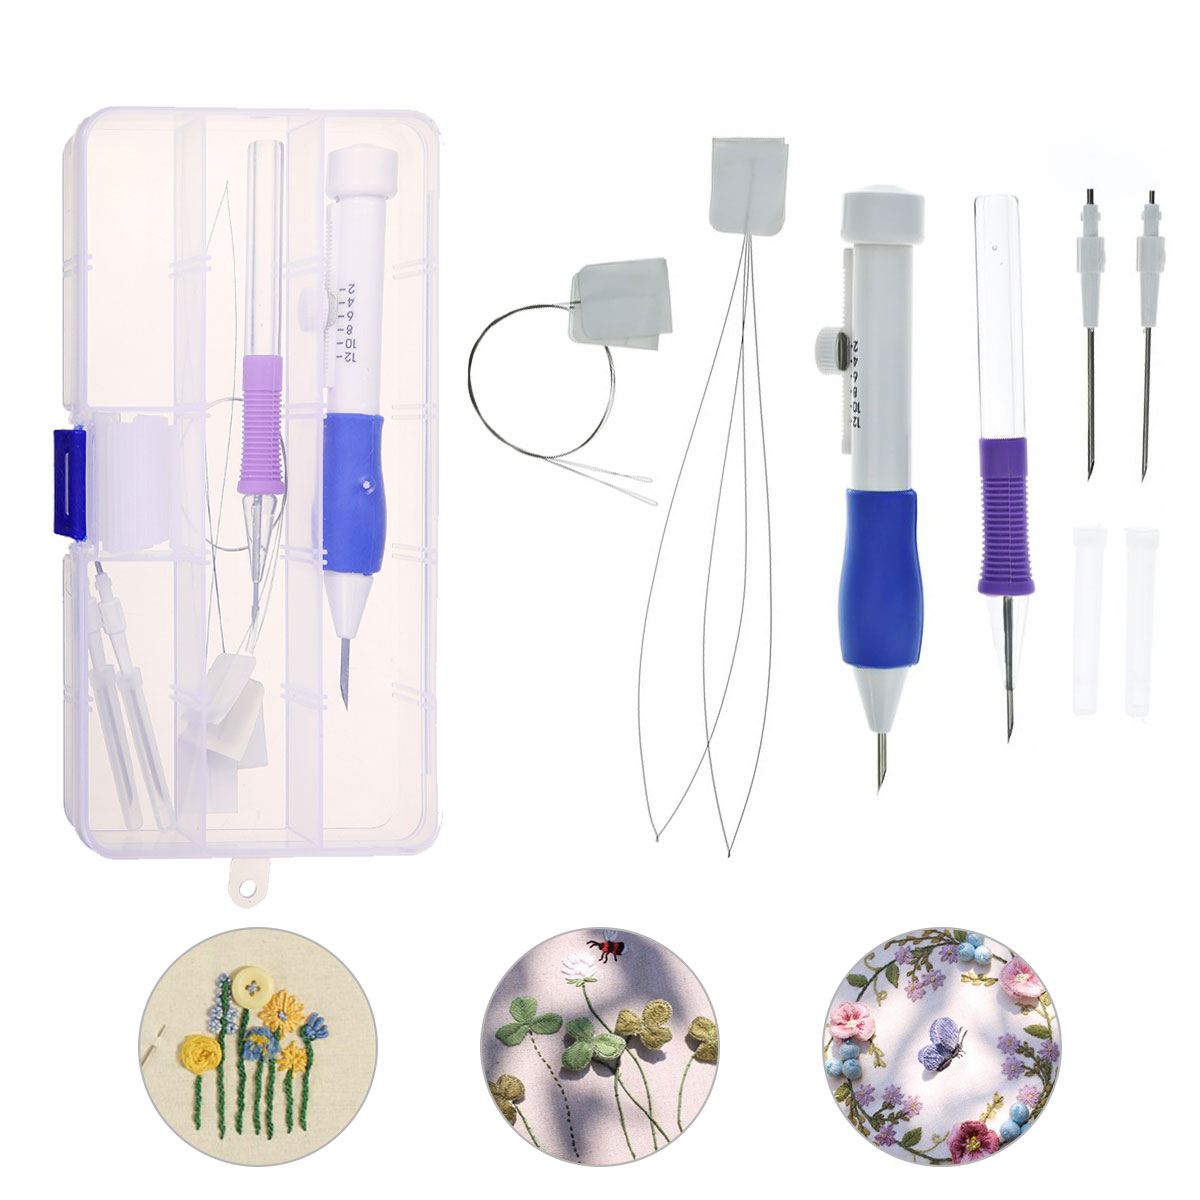 

Magic Embroidery Pen Punch Needle Set Embroidery Patterns Punch Needle Kit Knitting Sewing DIY Tool